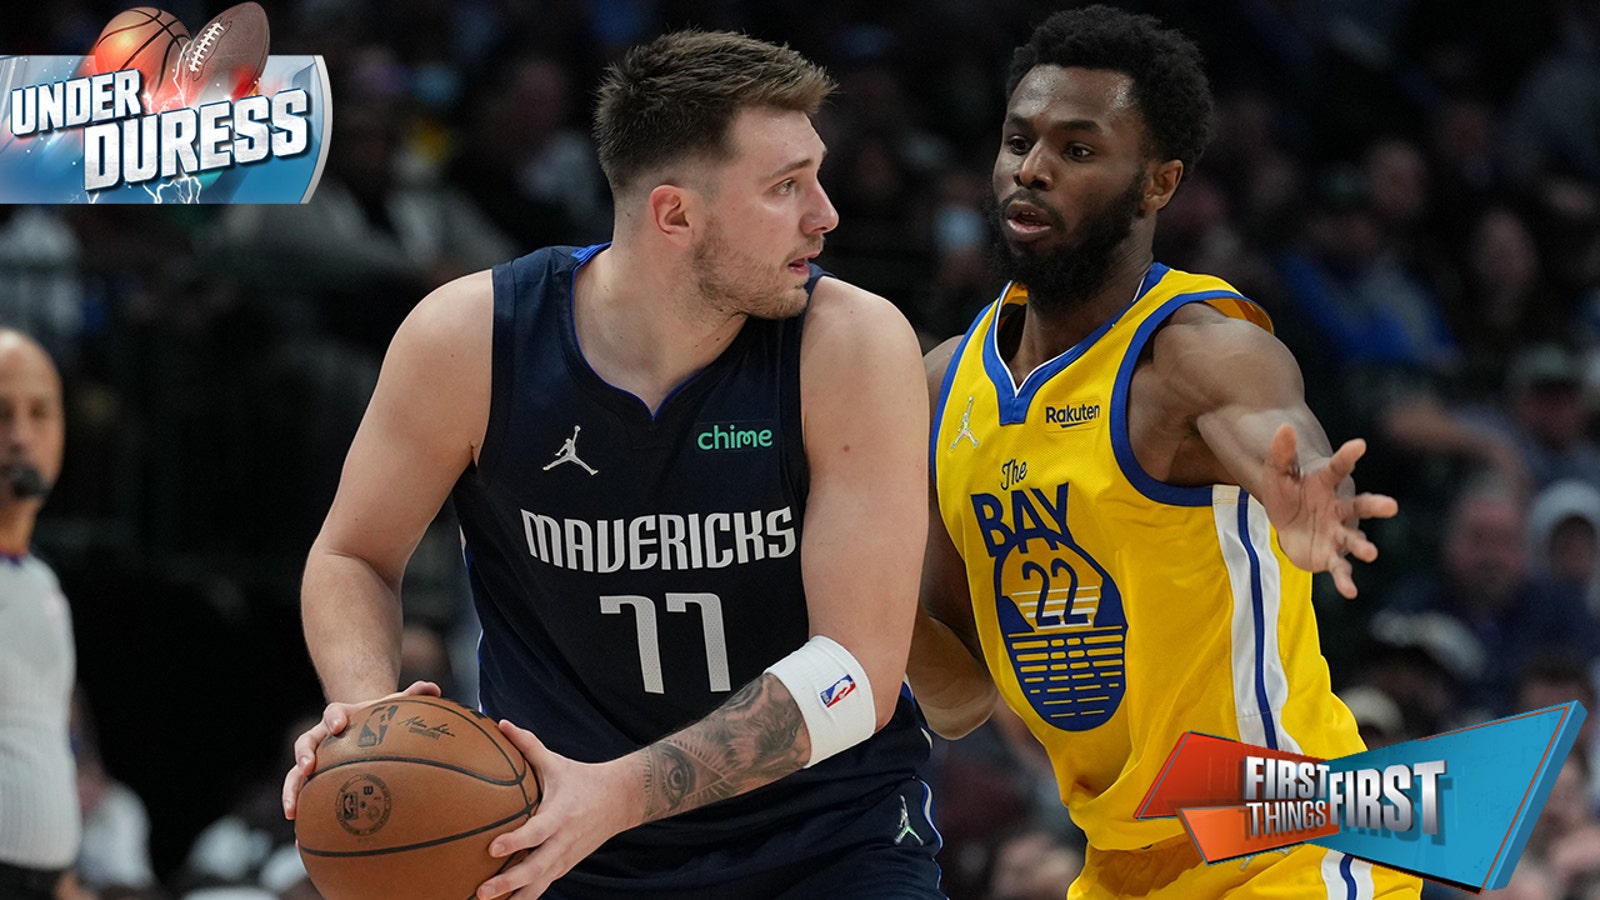 Luka Dončić and Andrew Wiggins are featured in Broussard's "Under Duress" list